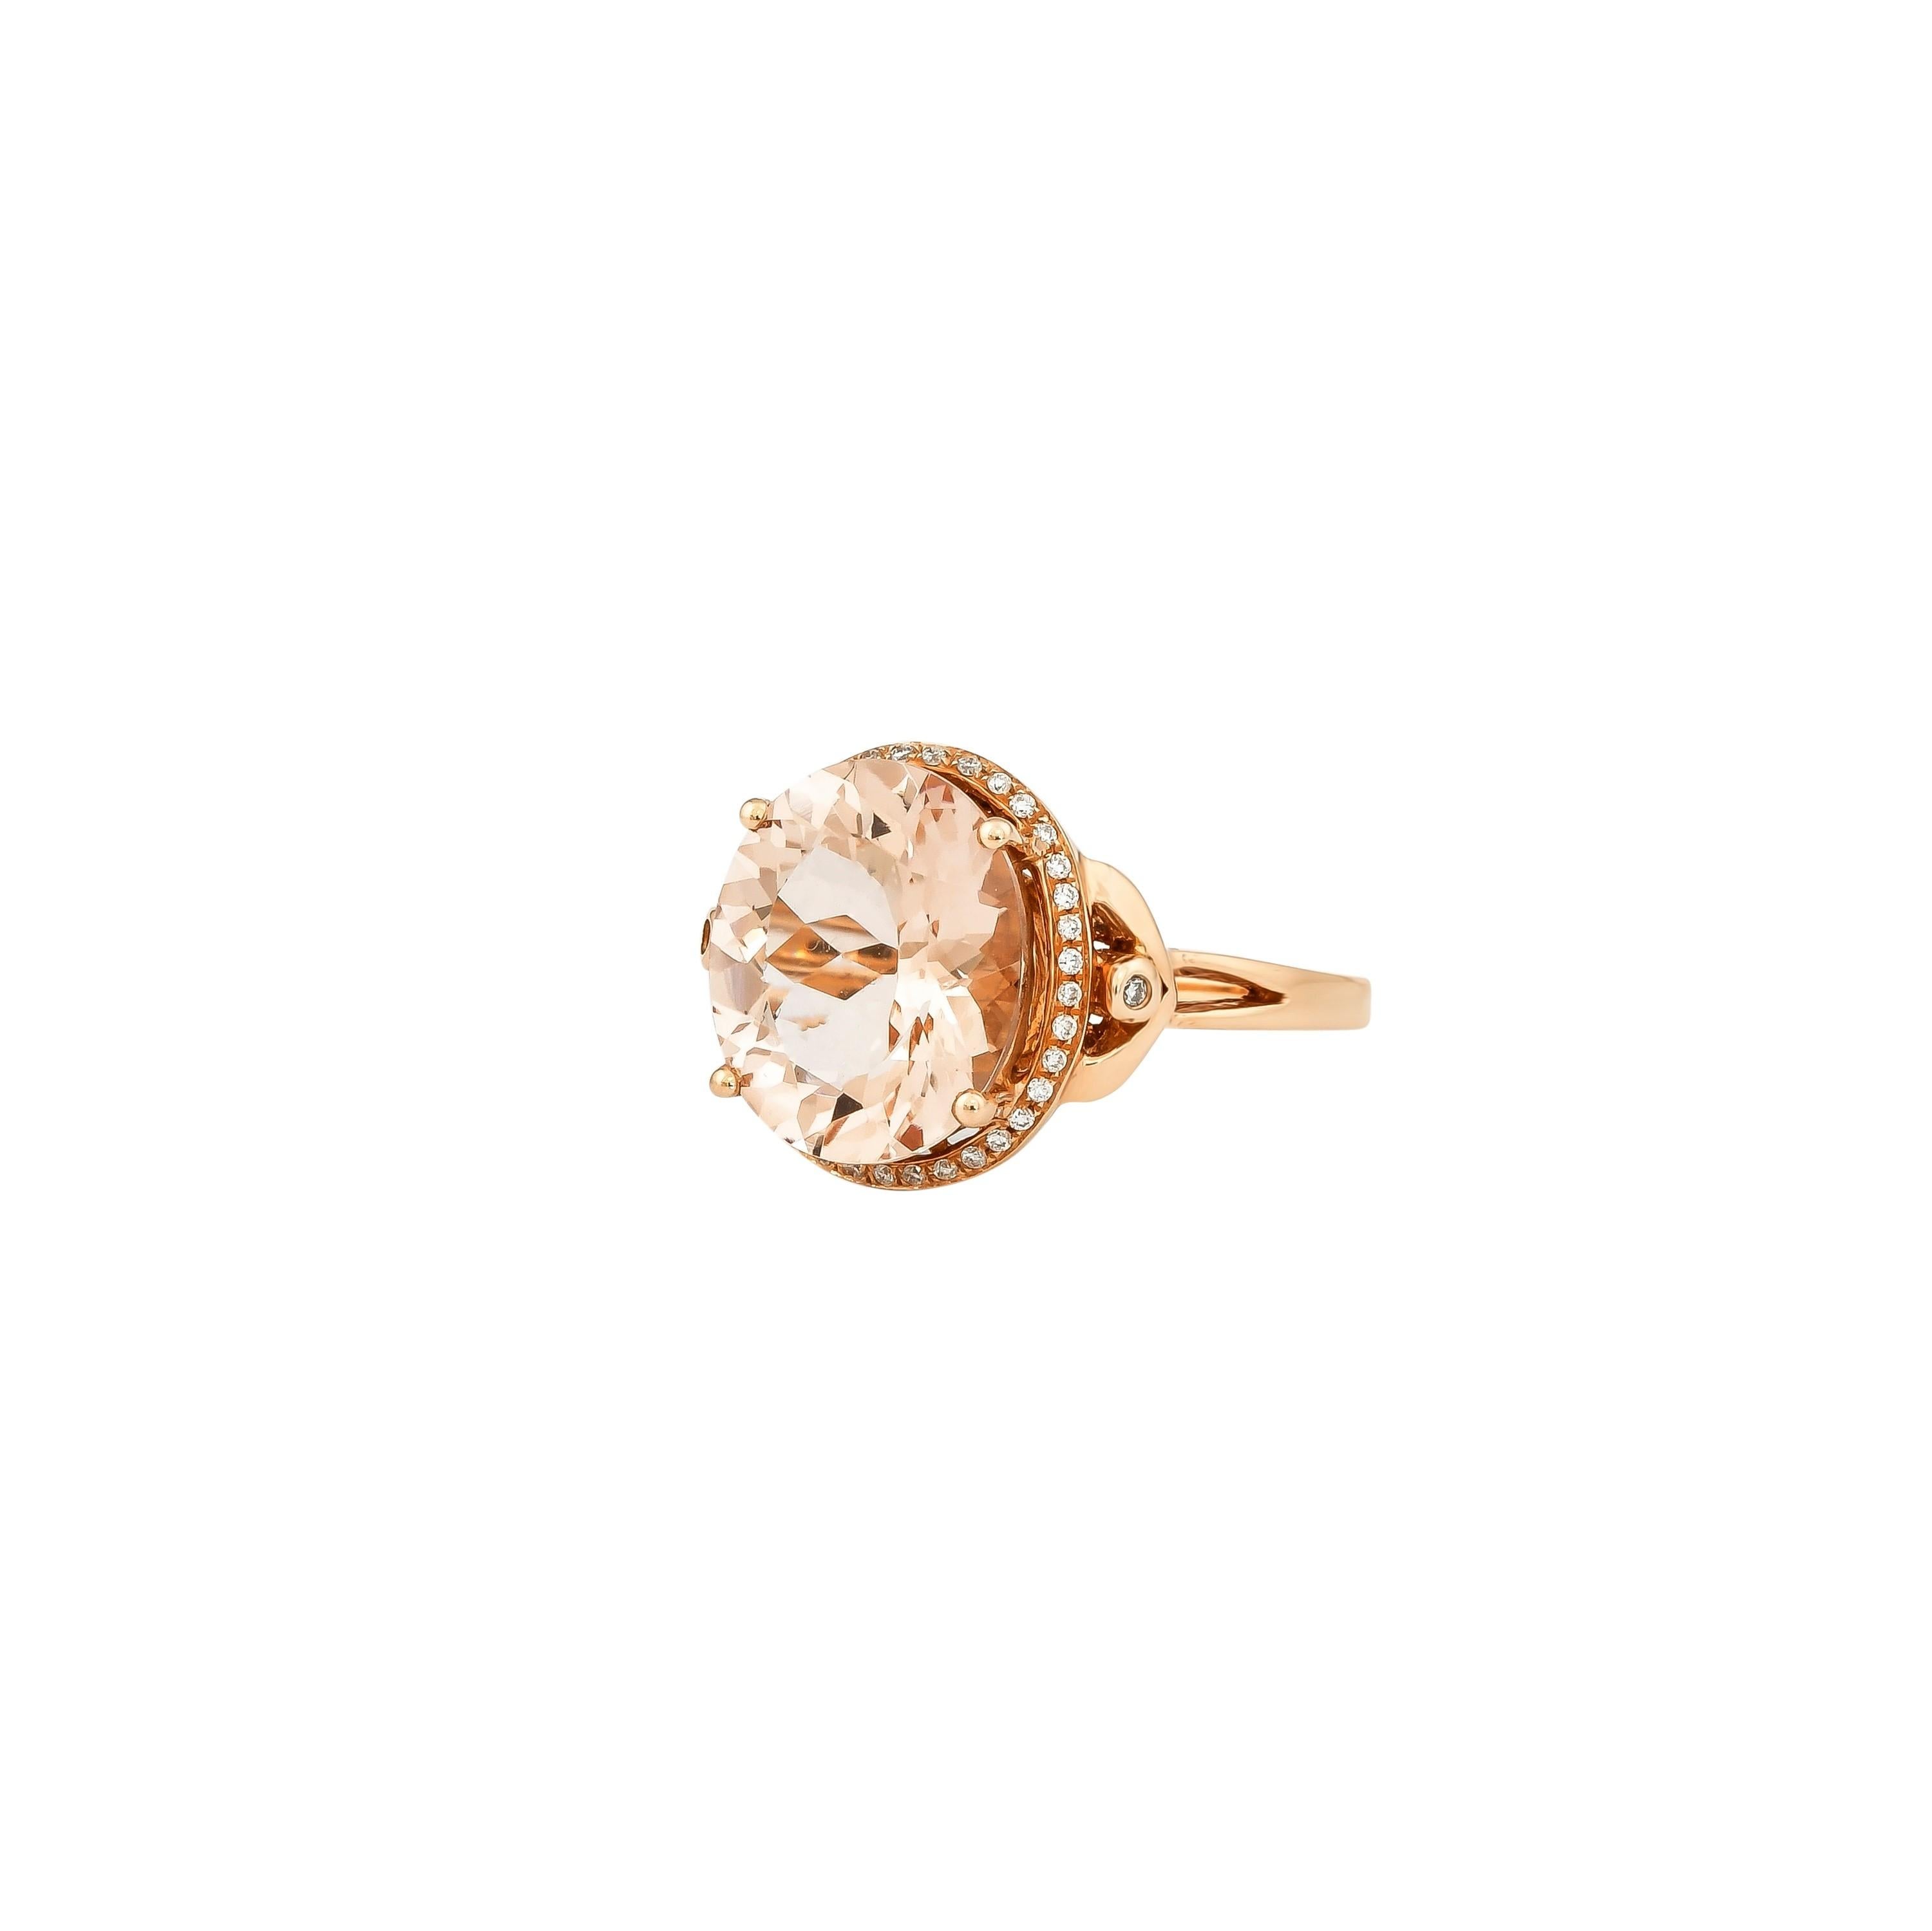 Contemporary 3.9 Carat Morganite Ring in 18 Karat Rose Gold with Diamond For Sale